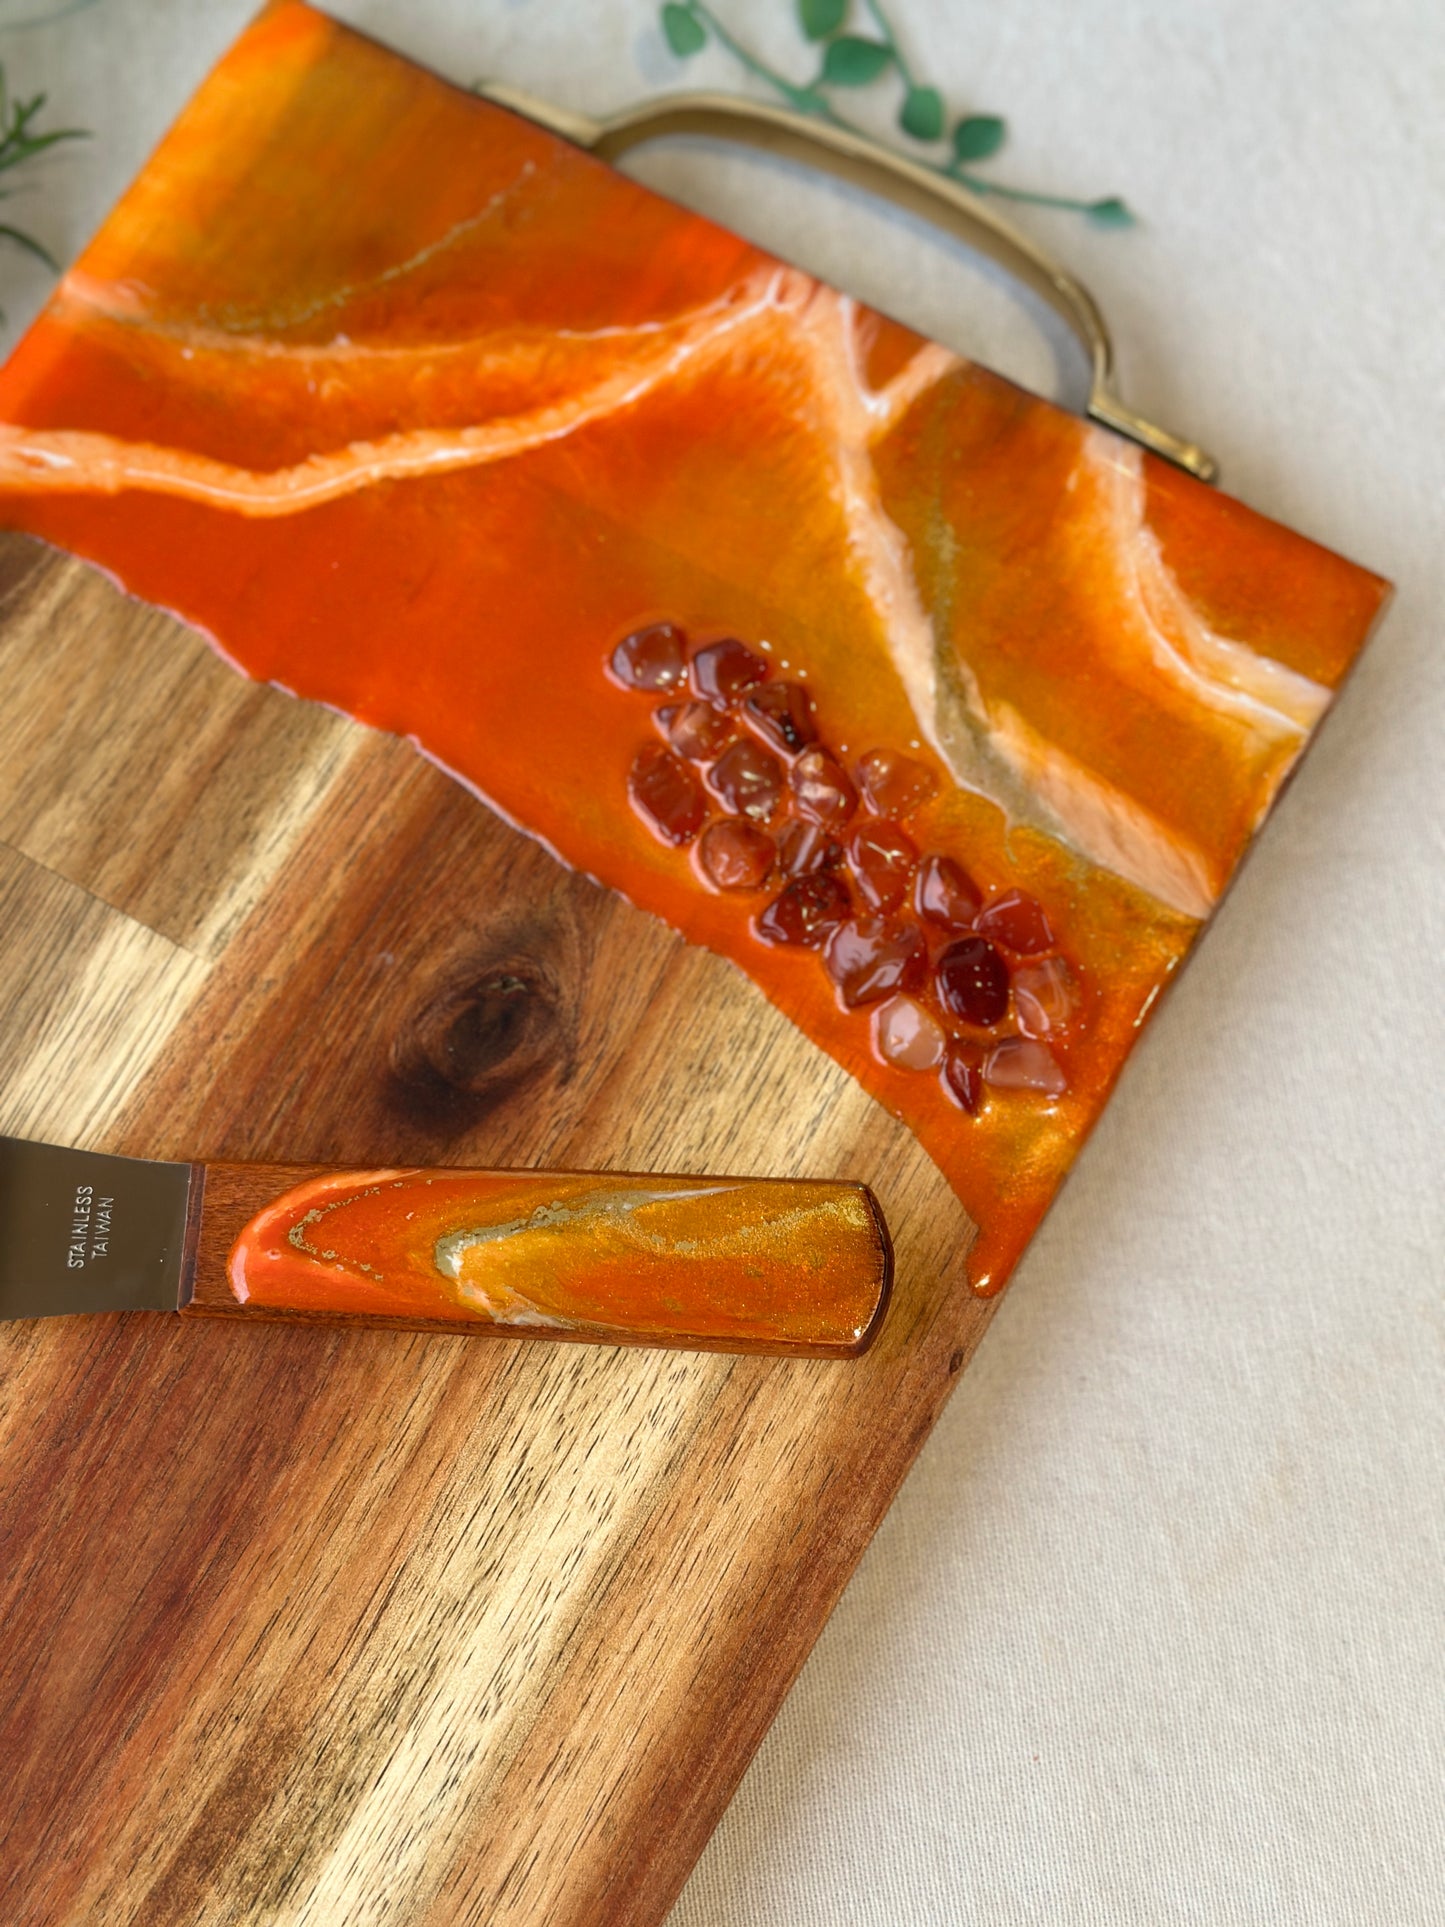 SERVING BOARD - metallic orange resin with real red carnelian gems, serving board with FREE matching knife - READY TO POST